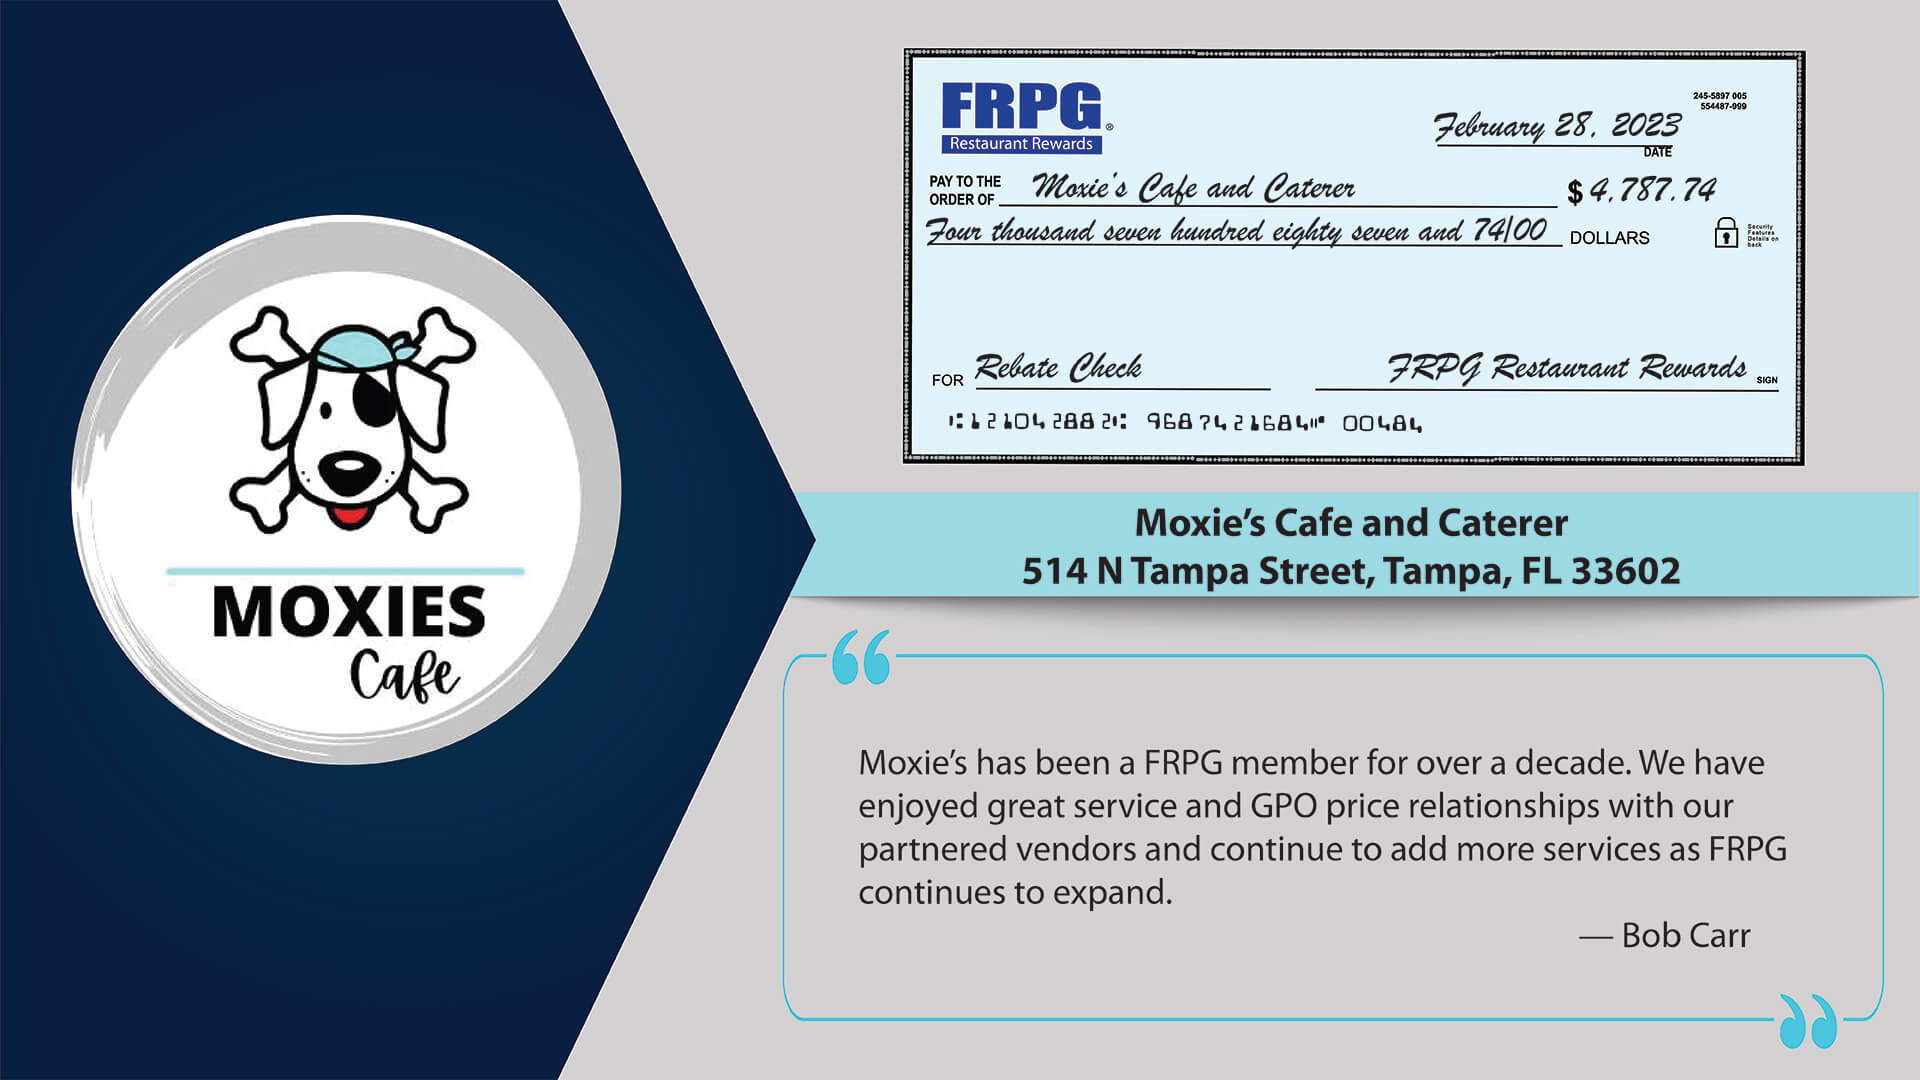 -Customer Reviews on FRPG Service